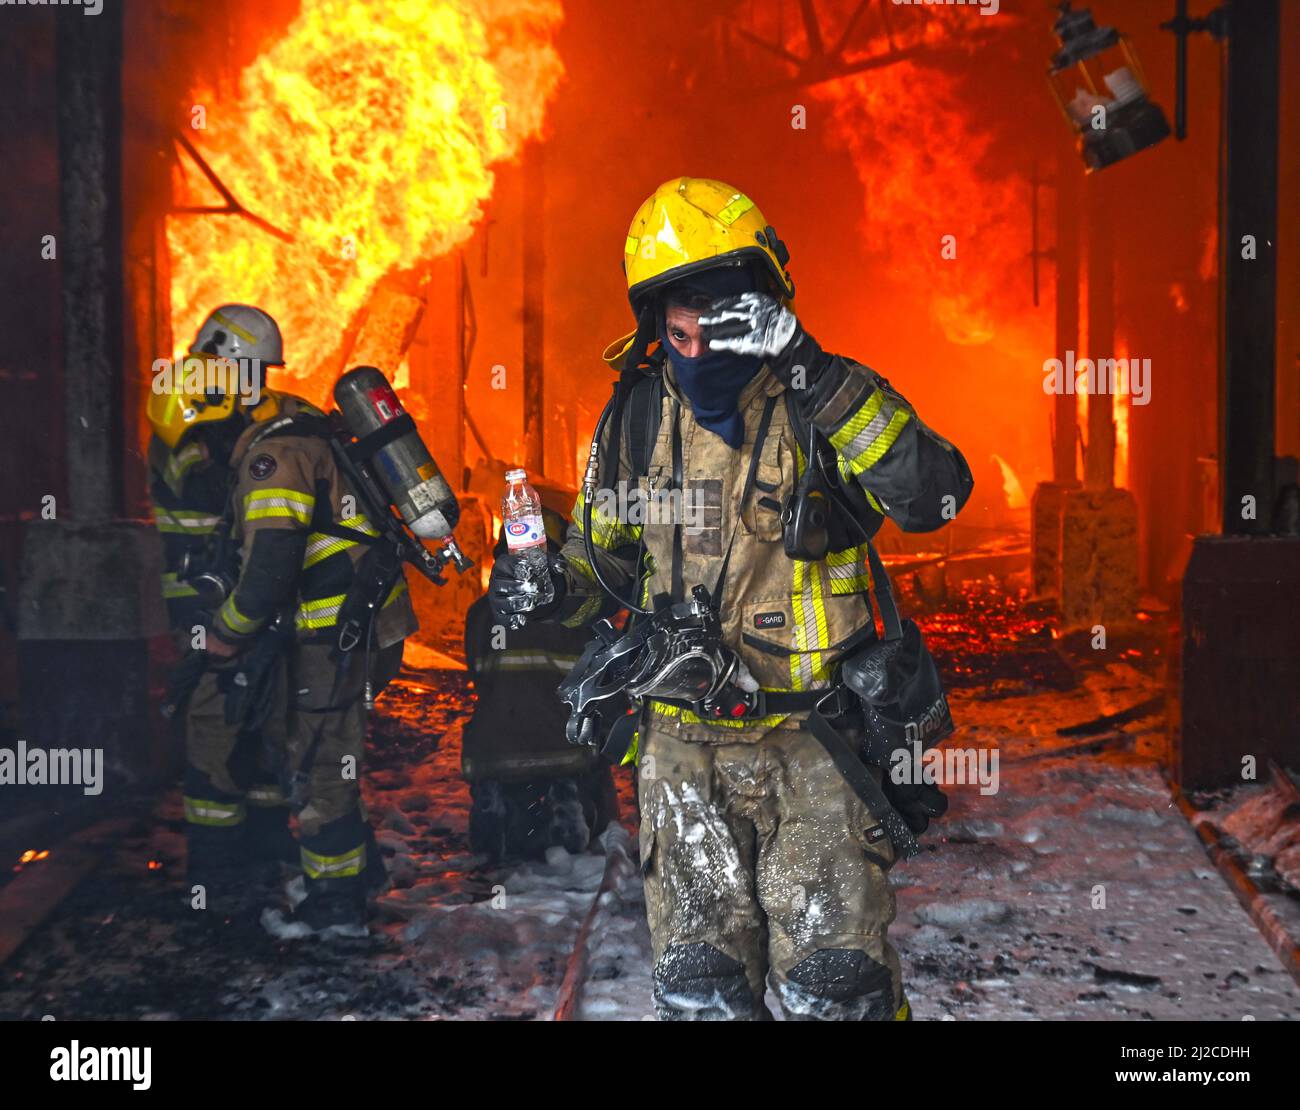 Kuwait City, Kuwait. 31st Mar, 2022. Firefighters battle a fire at Al-Mubarakiya market in Kuwait City, Kuwait, on March 31, 2022. A total of 14 injured on Thursday afternoon as a huge fire broke out at Kuwait's popular Al-Mubarakiya market in Kuwait City, the Kuwait News Agency (KUNA) said. Credit: Asad/Xinhua/Alamy Live News Stock Photo